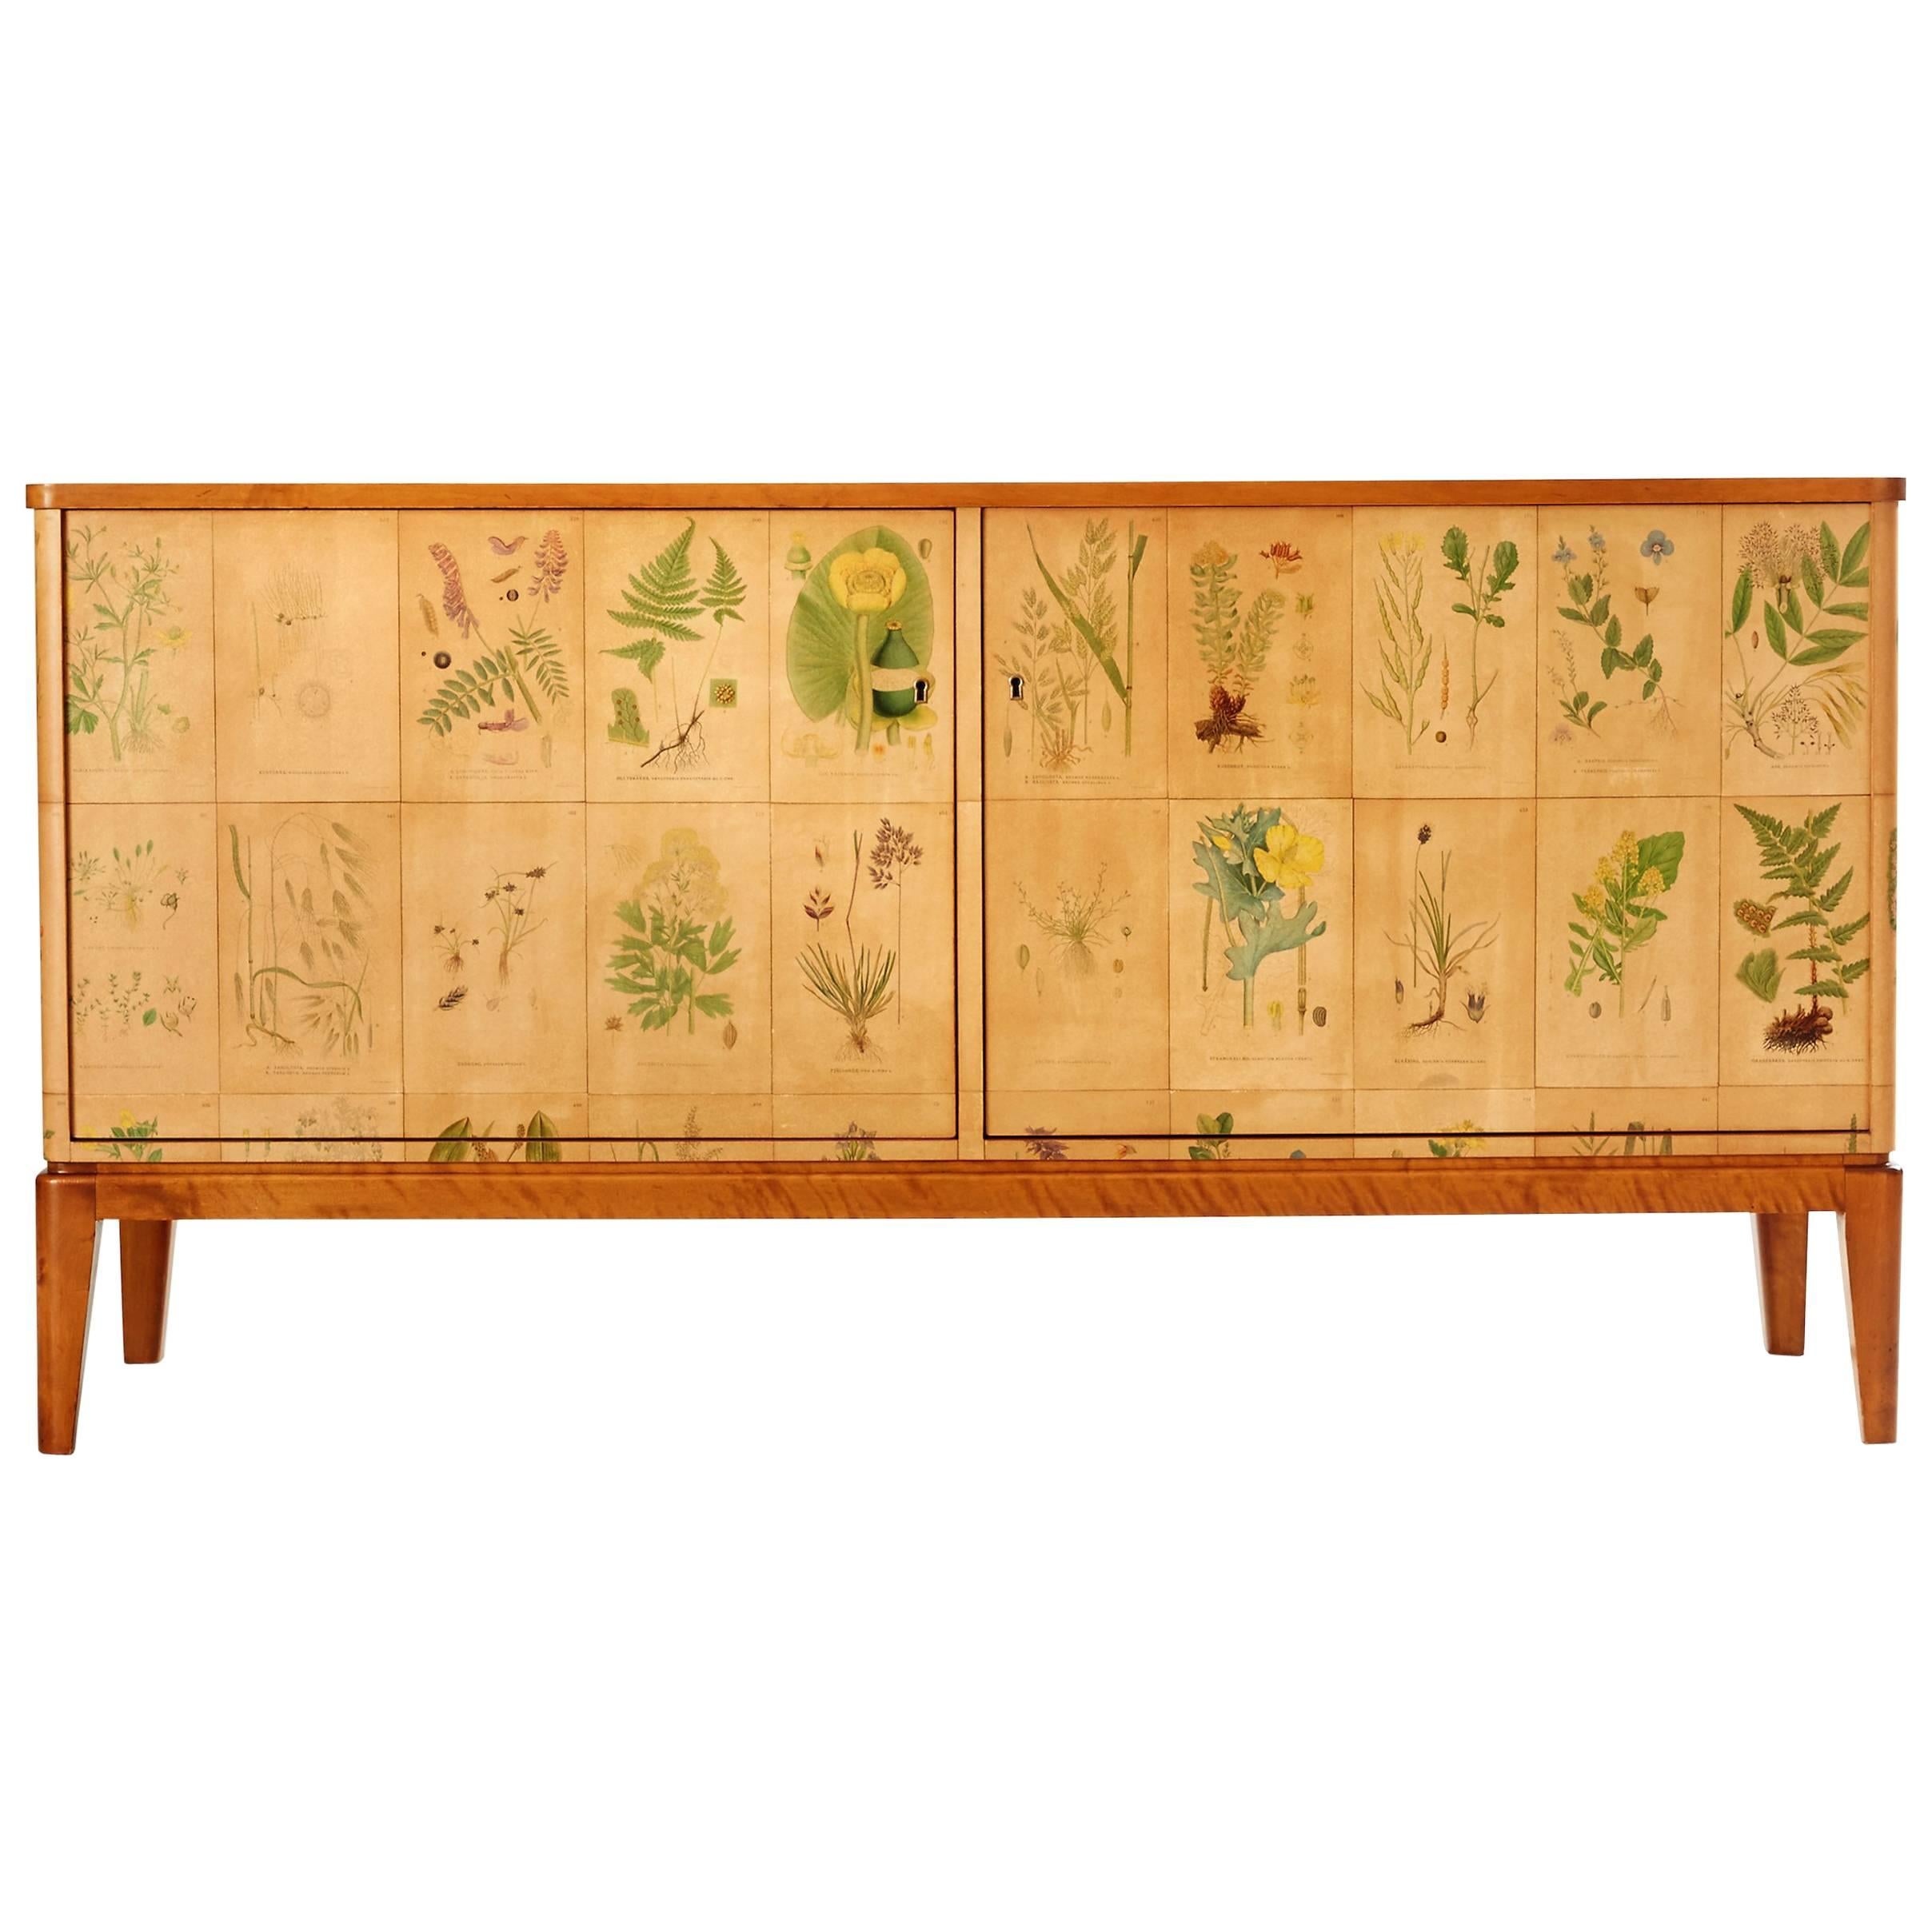 Cabinet with Flora Decor from C.A. Lindman's Nordens Flora